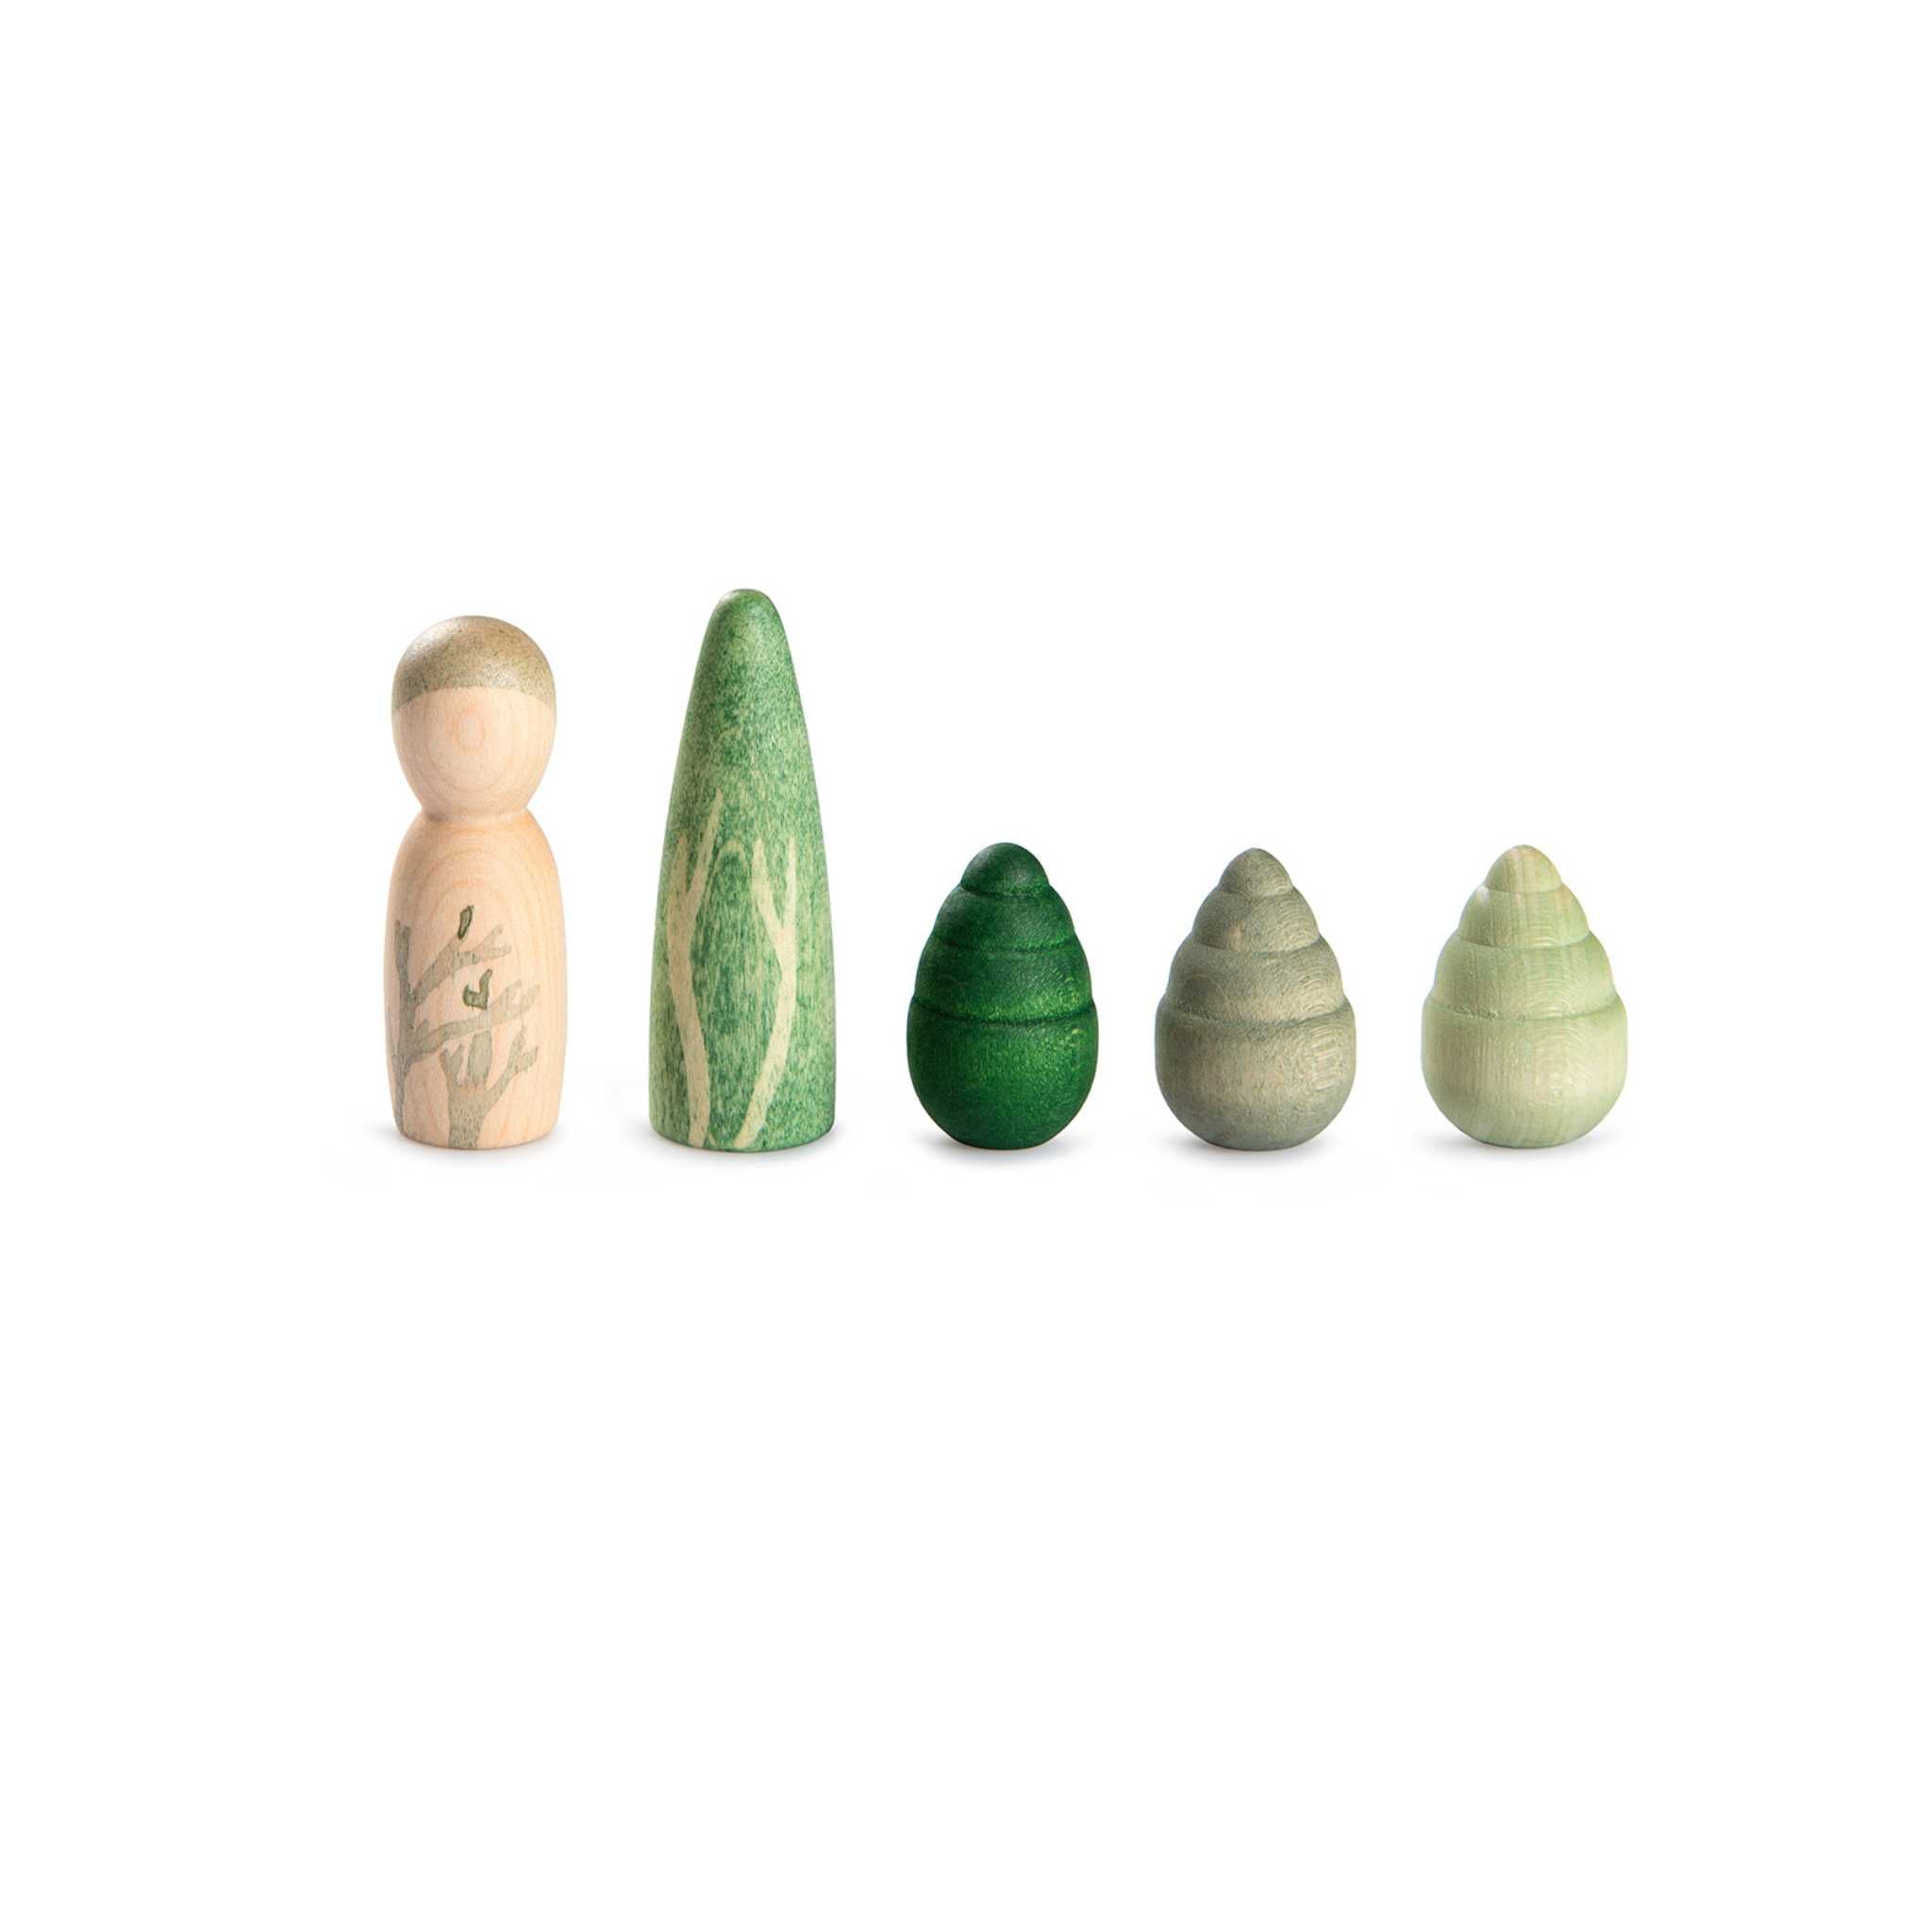 5 Green Wooden Toys From Grapat Lucky Lucky Collection on White Background